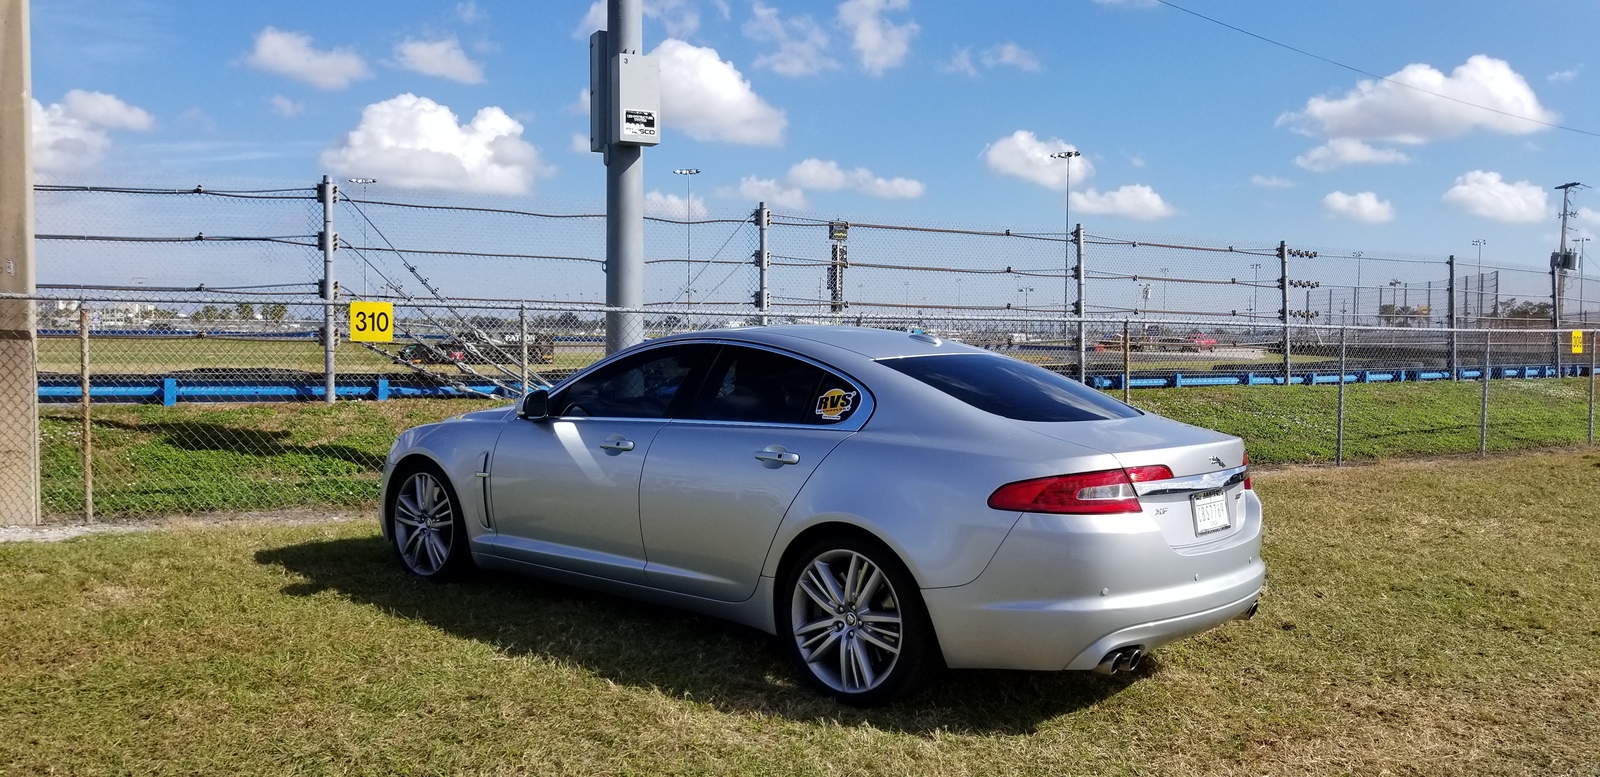 2010 Silver  Jaguar XF 5.0 Supercharged  picture, mods, upgrades